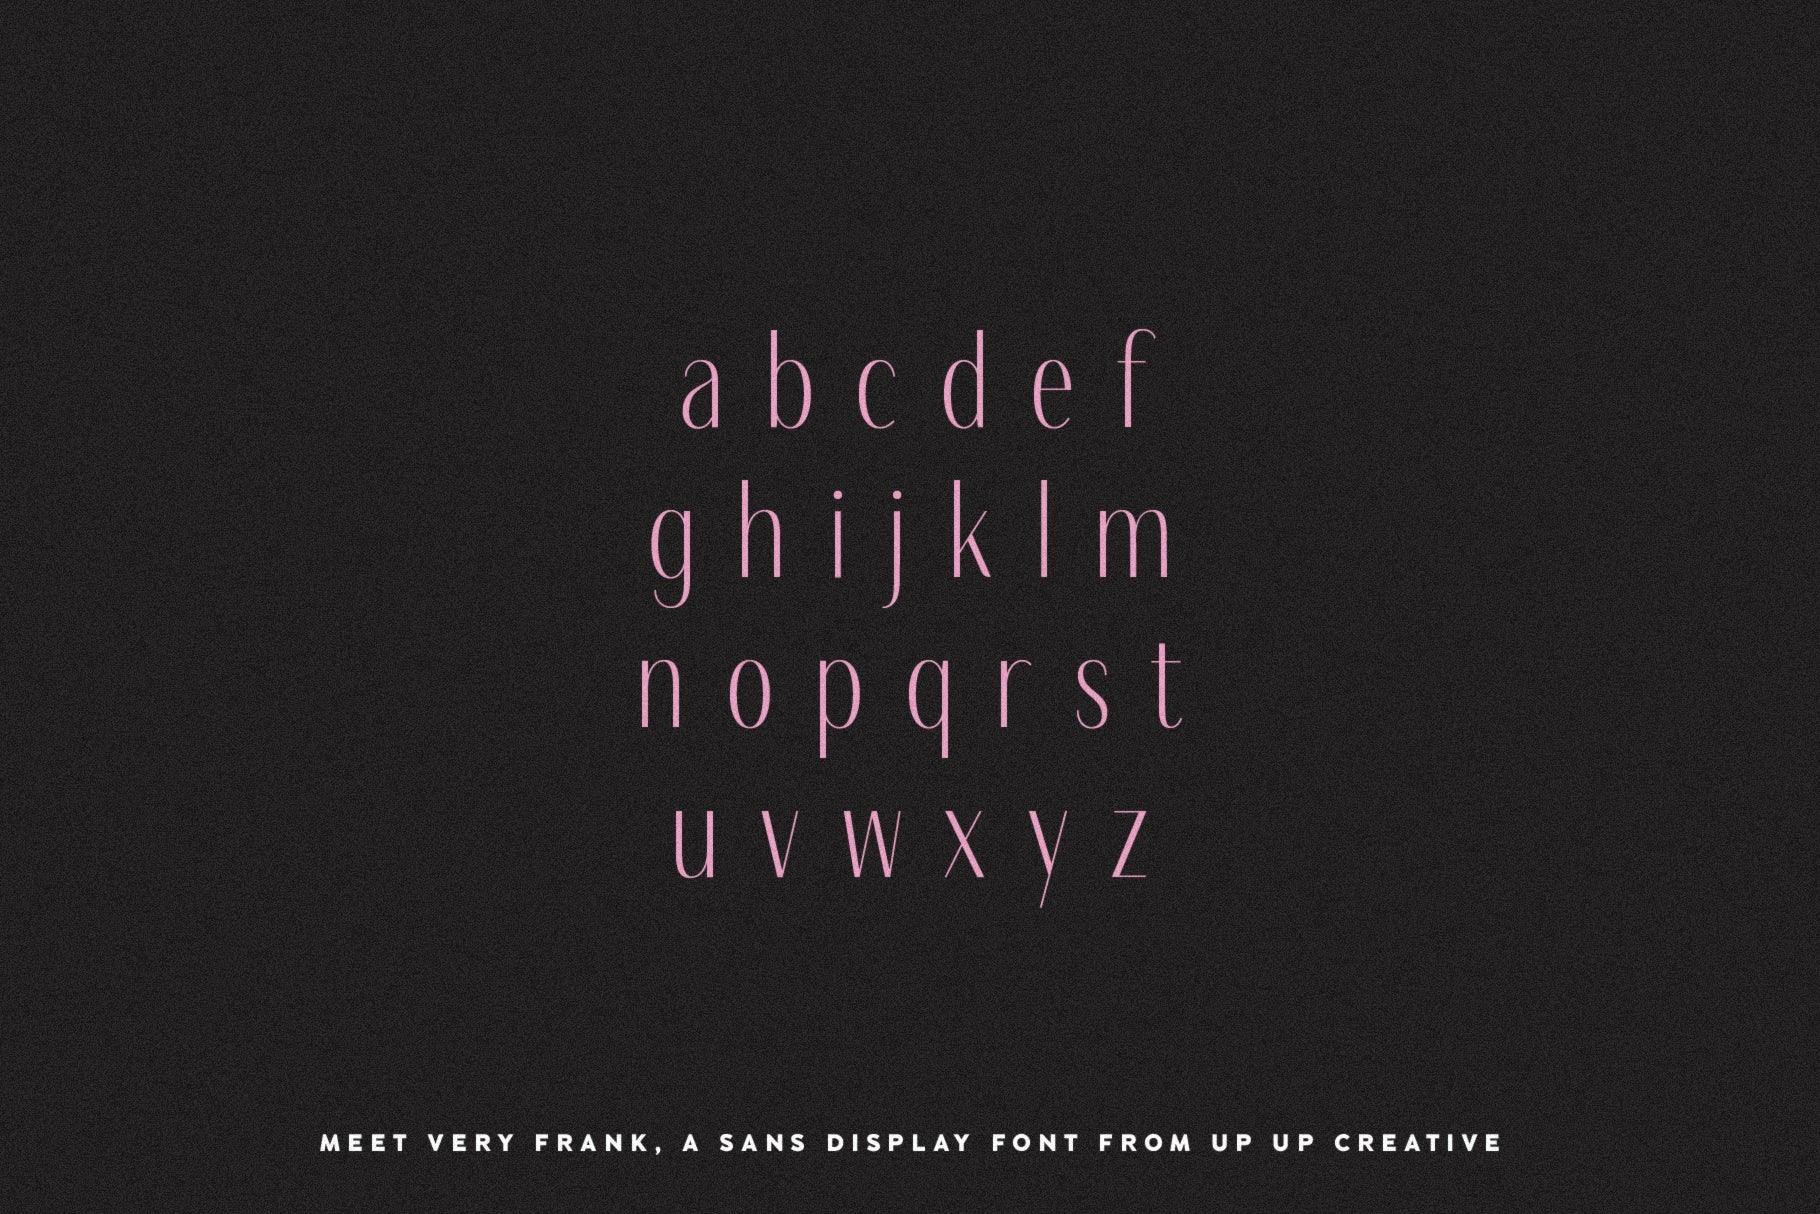 Very Frank Condensed Sans Serif Display Font with Italics - Up Up Creative